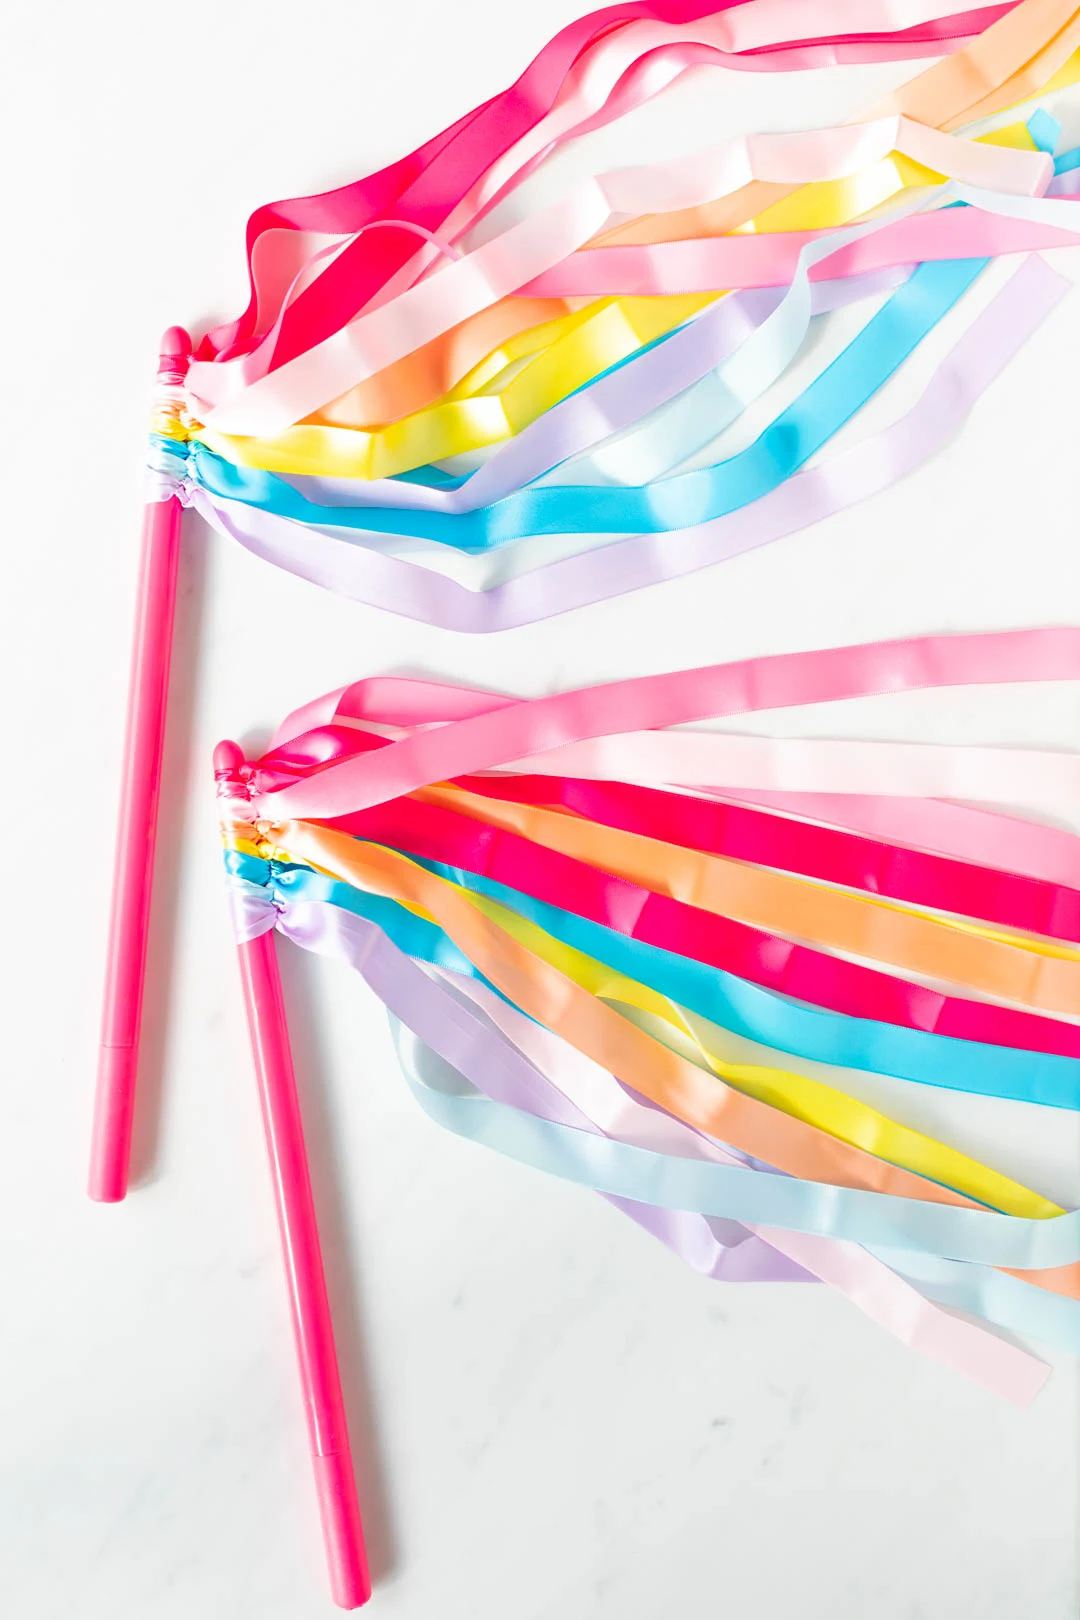 do it yourself dancing wands for kids. pink drumsticks with ribbons in rainbow colors